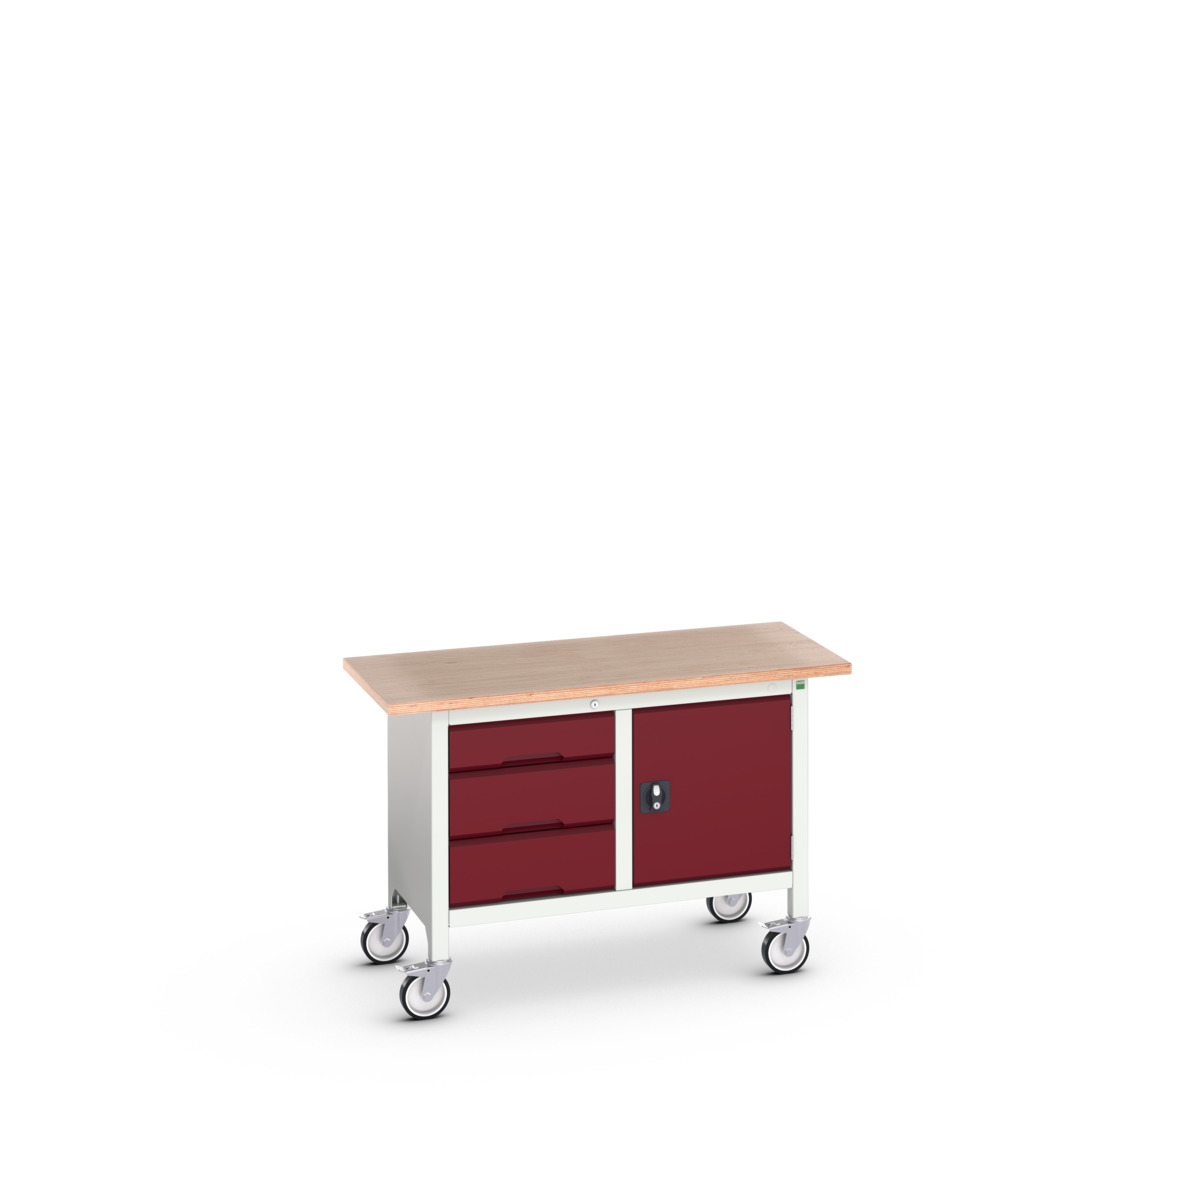 16923203.24 - verso mobile storage bench (mpx)